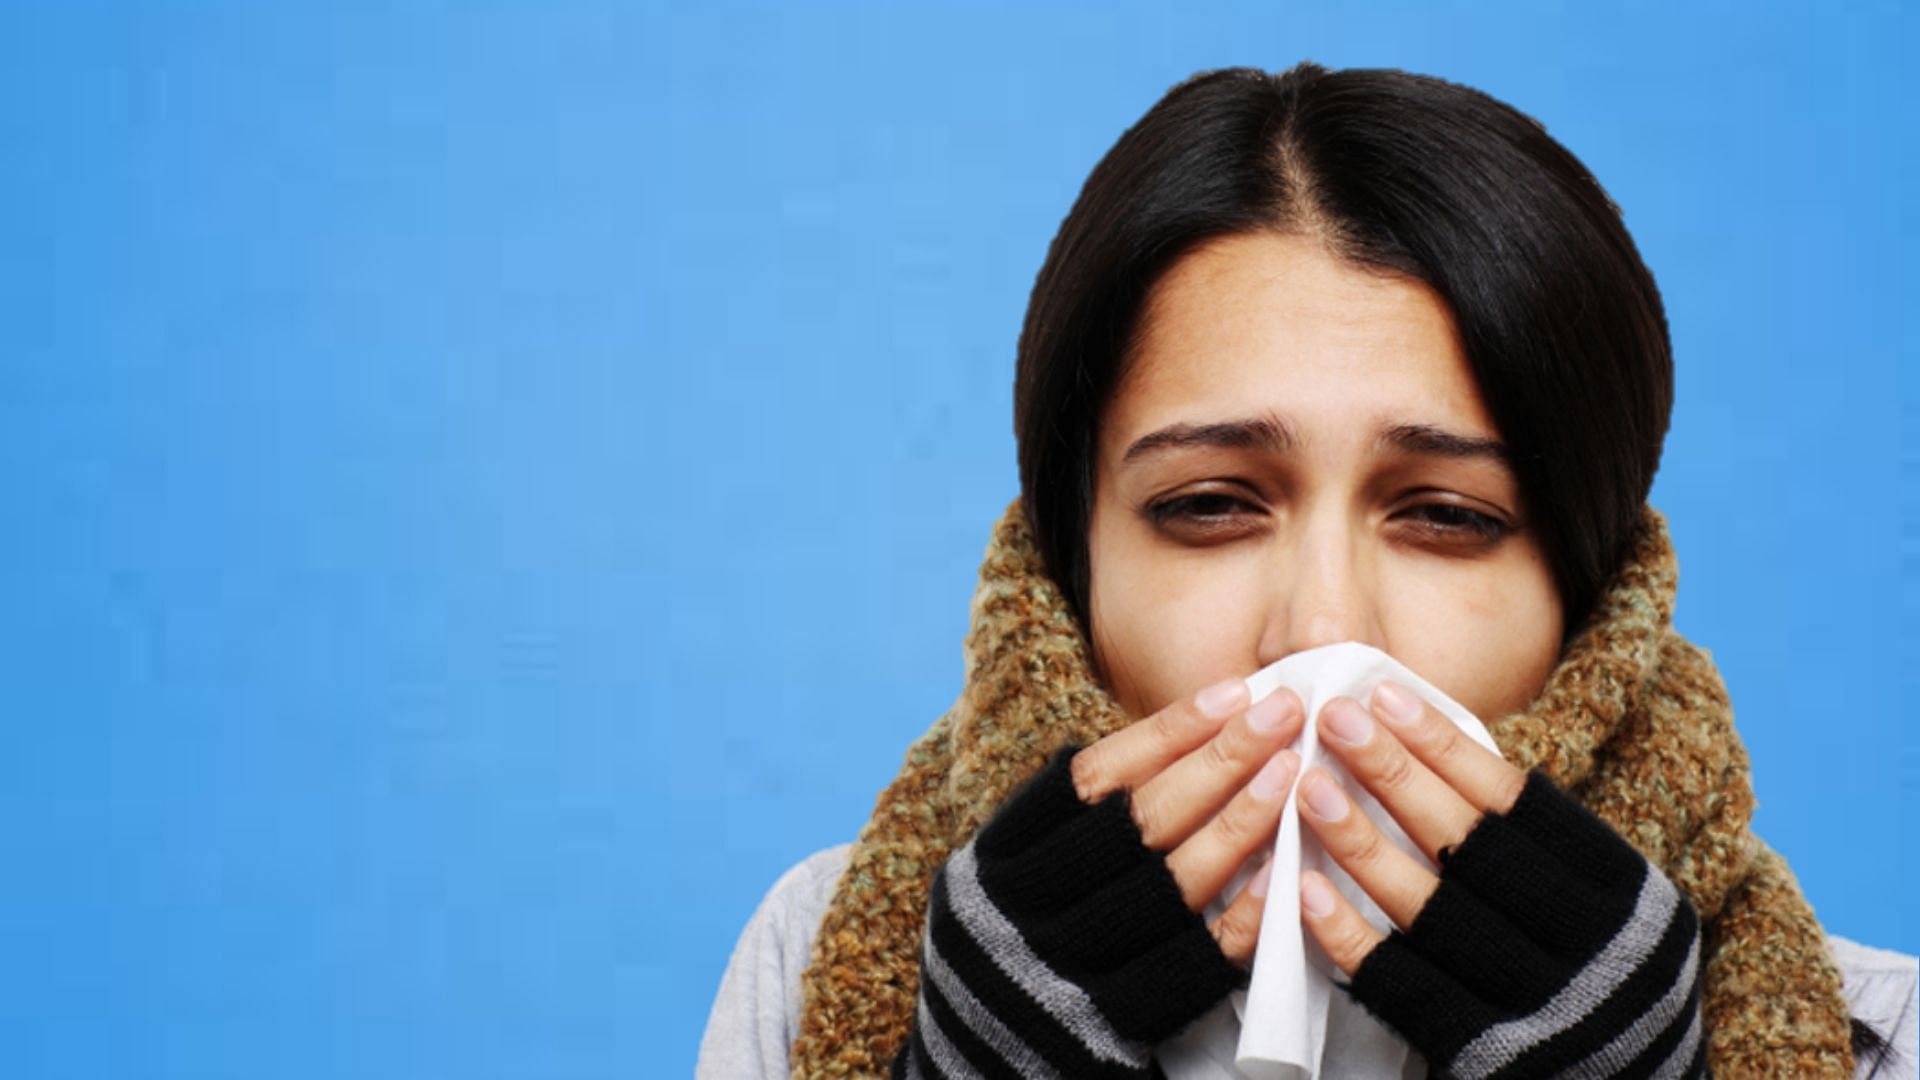 Here’s how you can prevent and cure the summer sniffles.